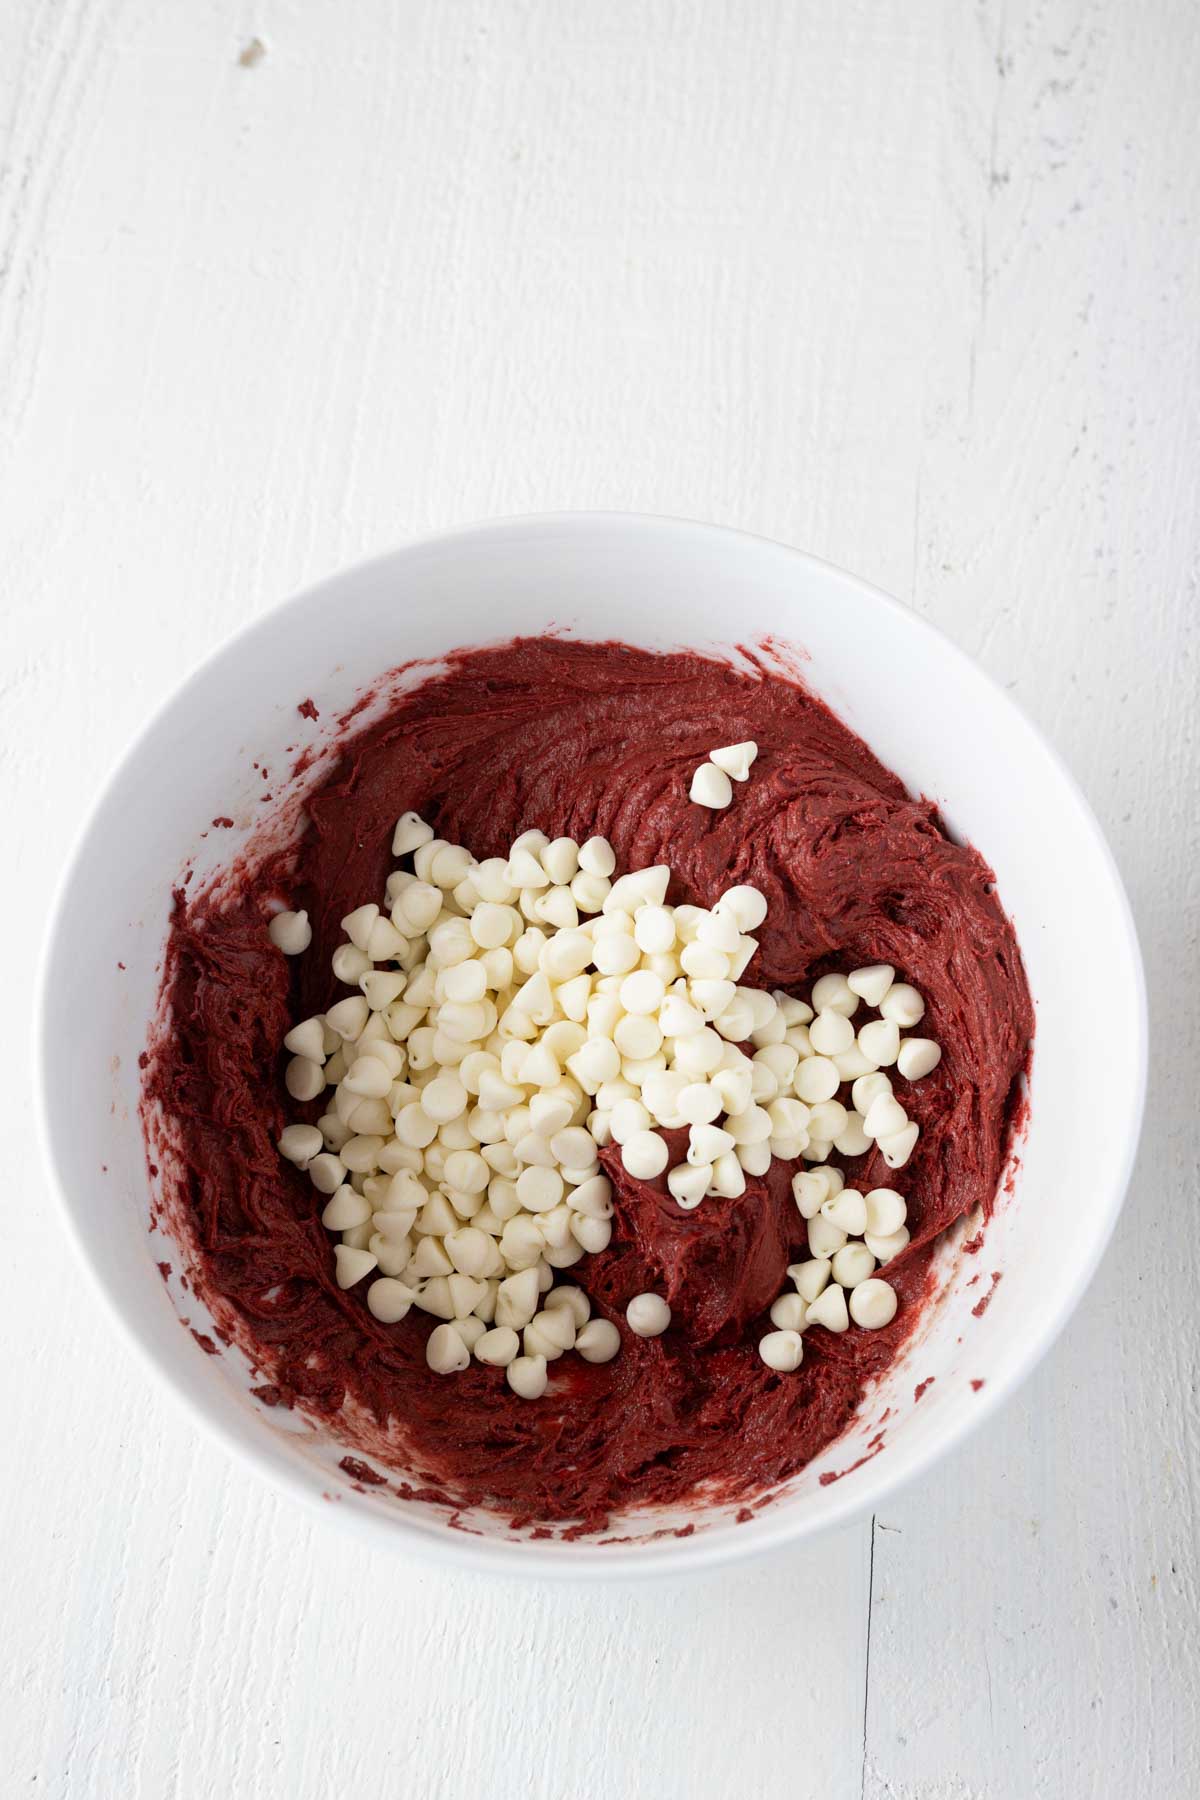 Red velvet cake mix cookie dough with white chocolate chips in a mixing bowl.